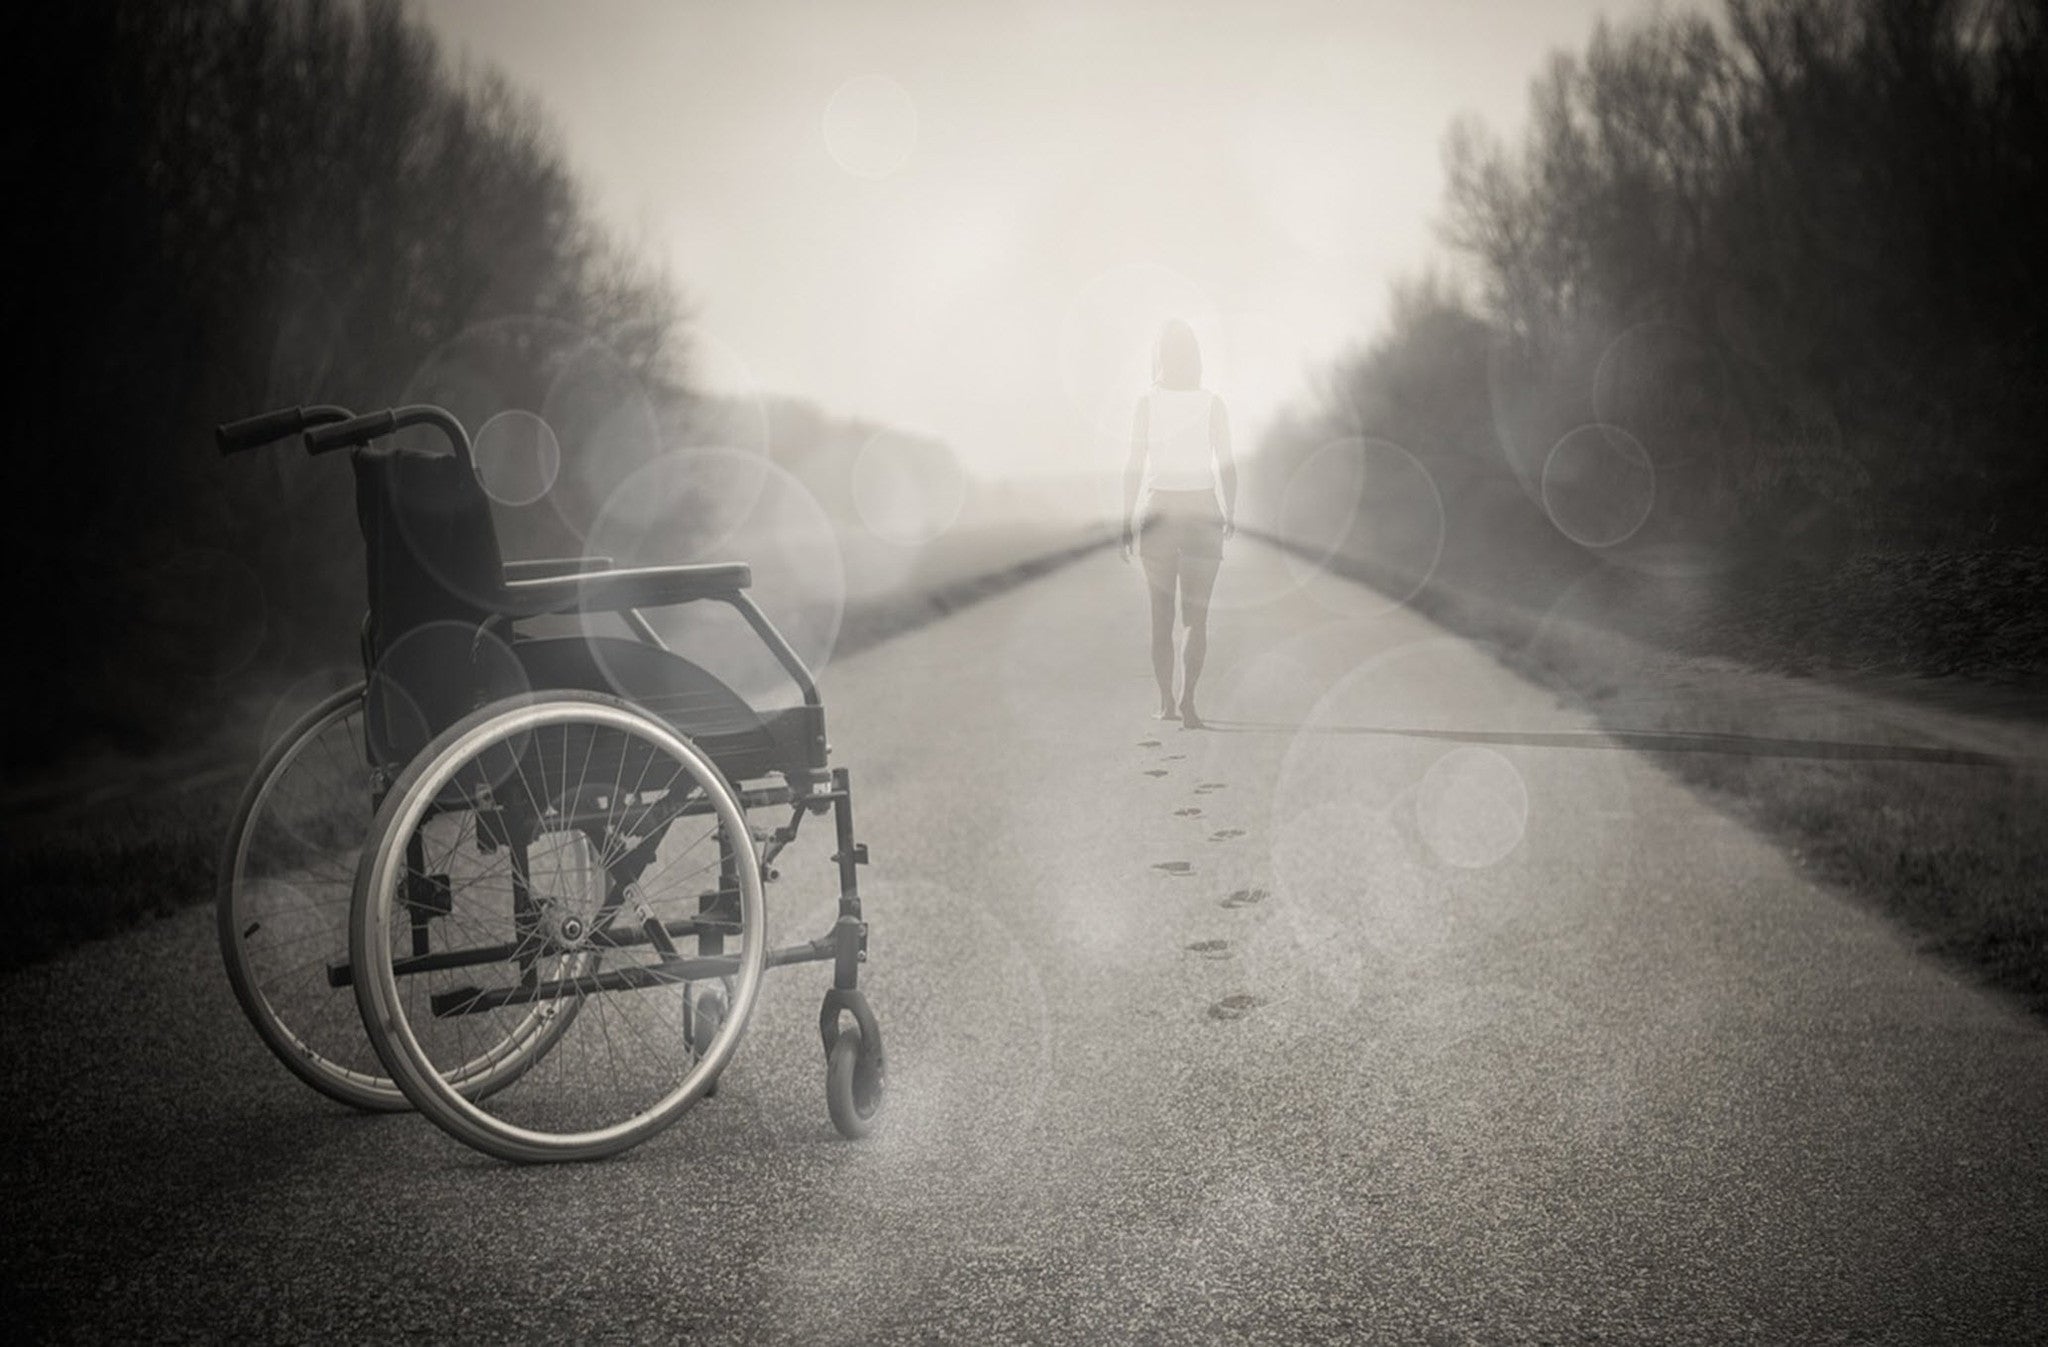 The Perfected Body? Disability and the Resurrection